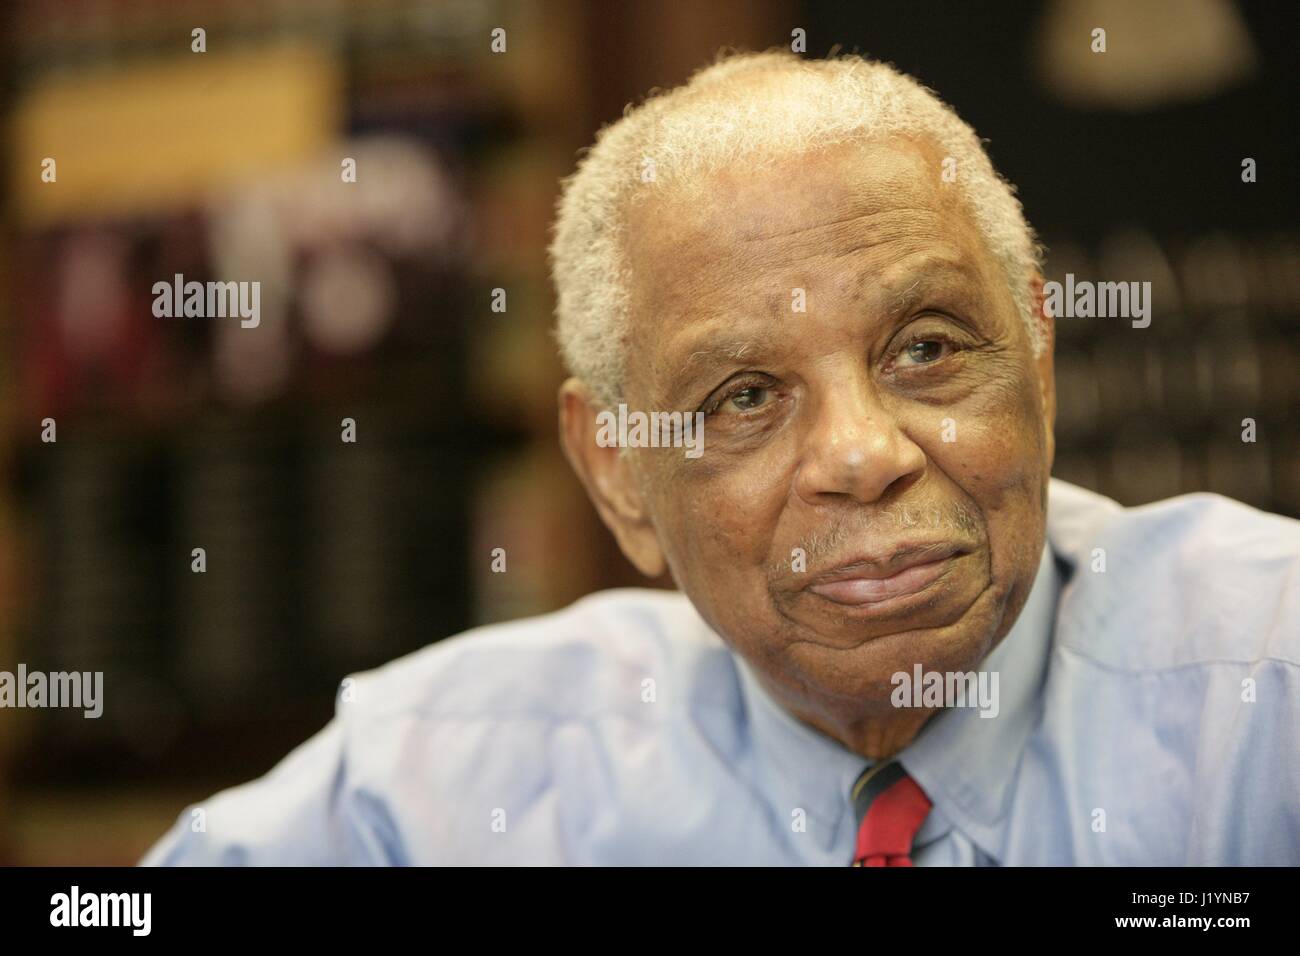 May 13, 2010 - Michigan, Michigan, U.S. - Judge Damon J. Keith (Senior Judge, U.S. Court of Appeals for the Sixth Circuit Court) is photographed in his office in the Federal courthouse in Detroit on Thursday, May 13, 2010..(Info from request: We're having a sit-down interview with Judge Damon Keith to talk about next week's ceremony that will kick off the building of the Damon J. Keith Center for Civil Rights at Wayne State University.).PATRICIA BECK/Staff Photographer (Credit Image: © Detroit Free Press via ZUMA Wire) Stock Photo